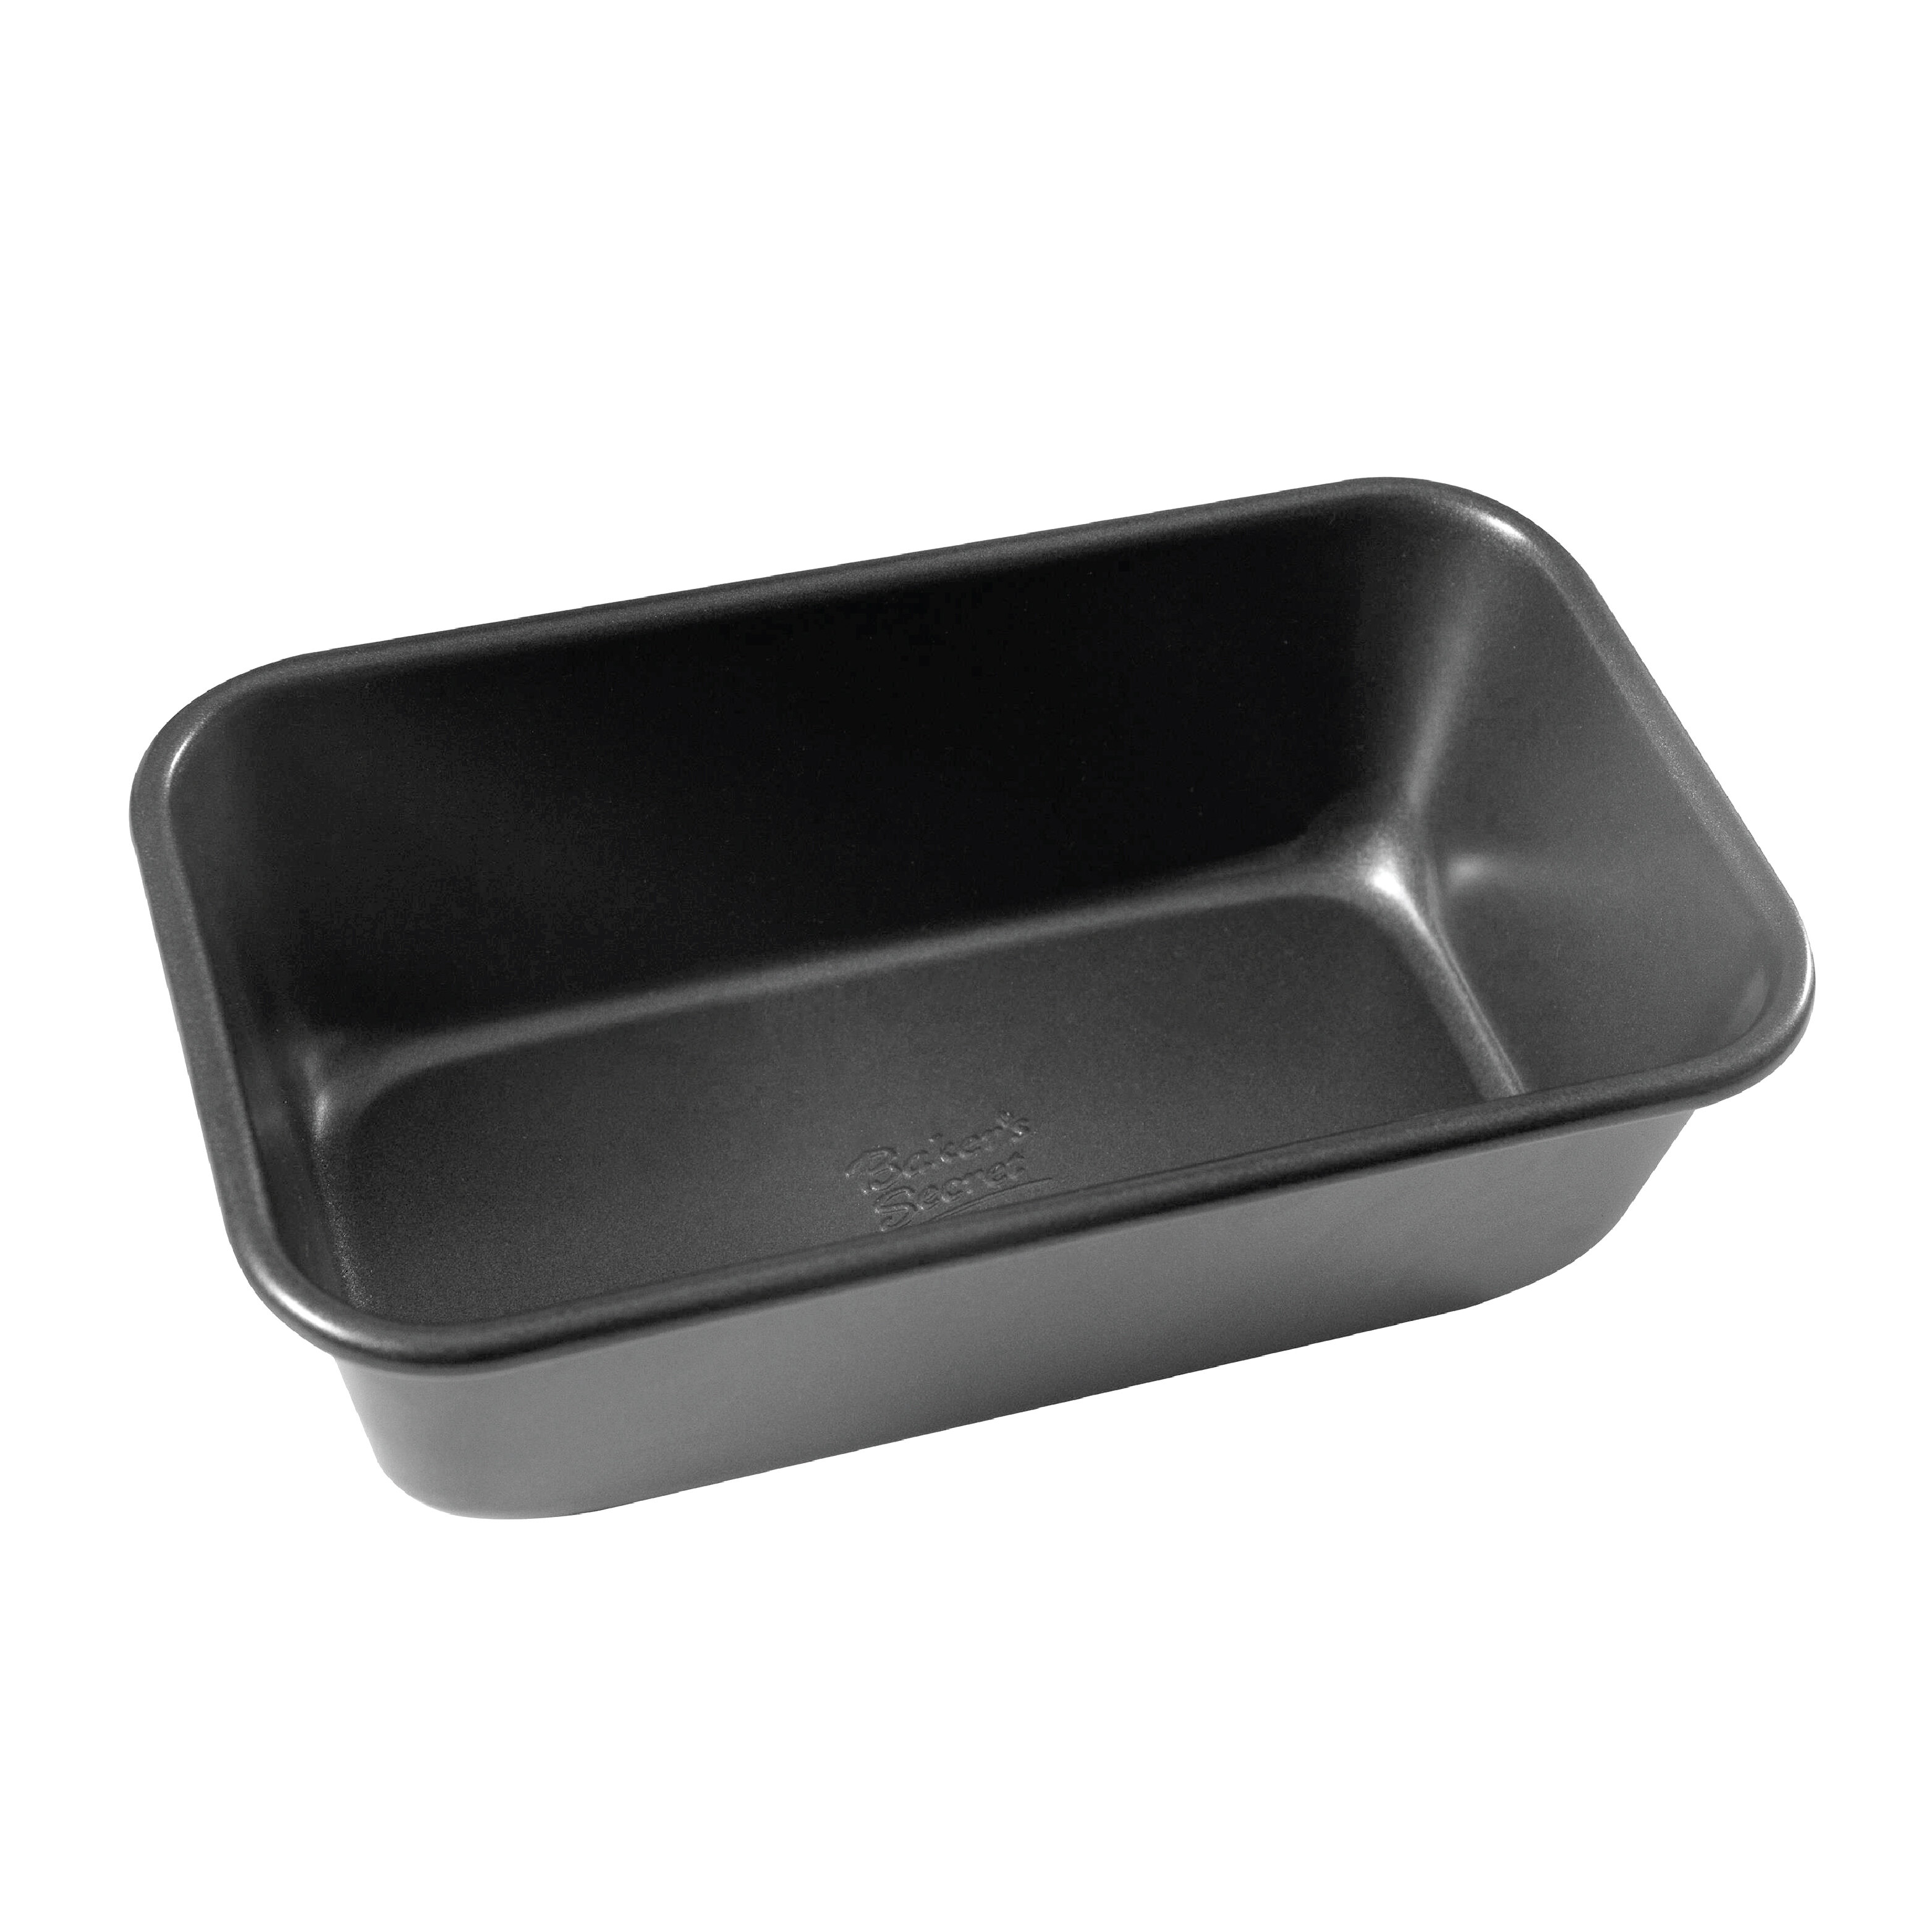 Baker's Secret Nonstick Square Cake Pan 8, Carbon Steel Pan with